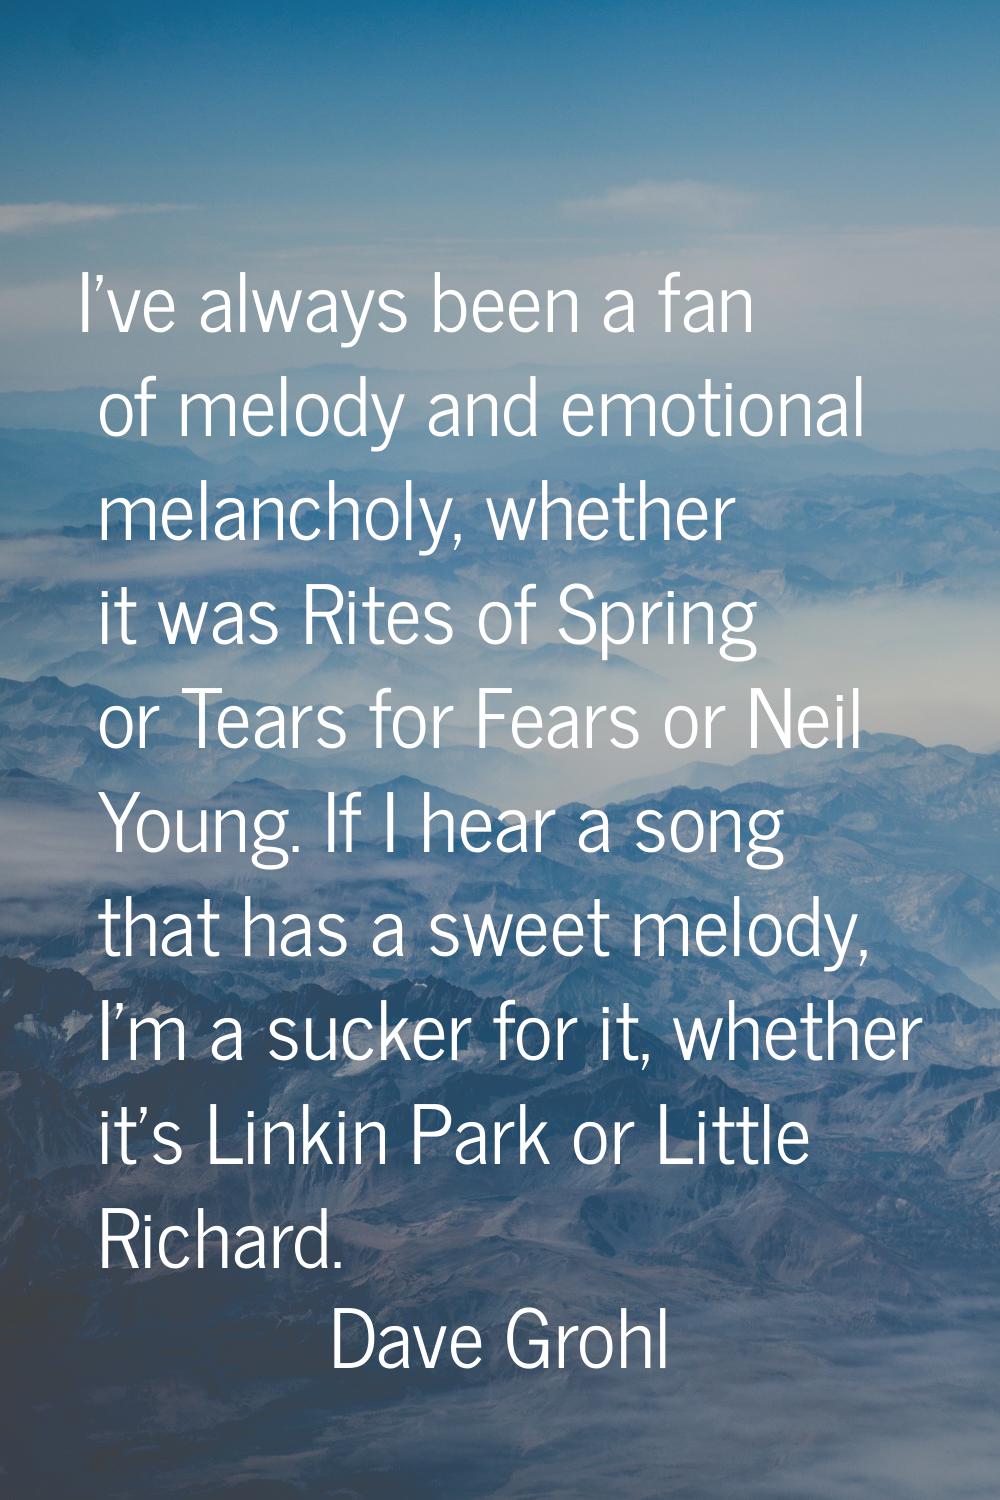 I've always been a fan of melody and emotional melancholy, whether it was Rites of Spring or Tears 